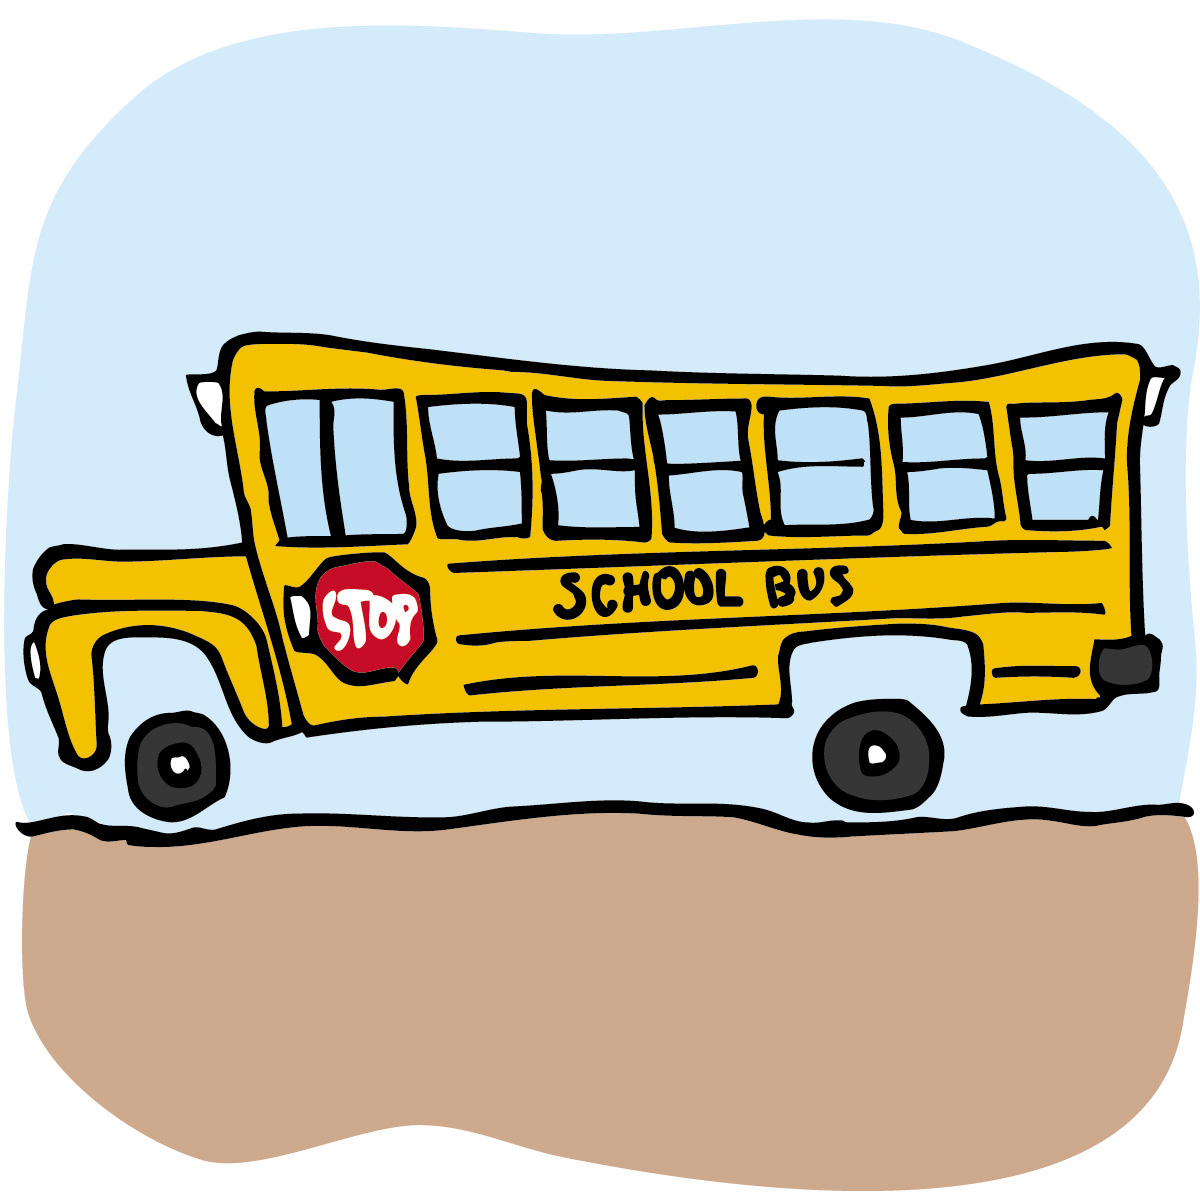 school bus clipart free black and white - photo #23